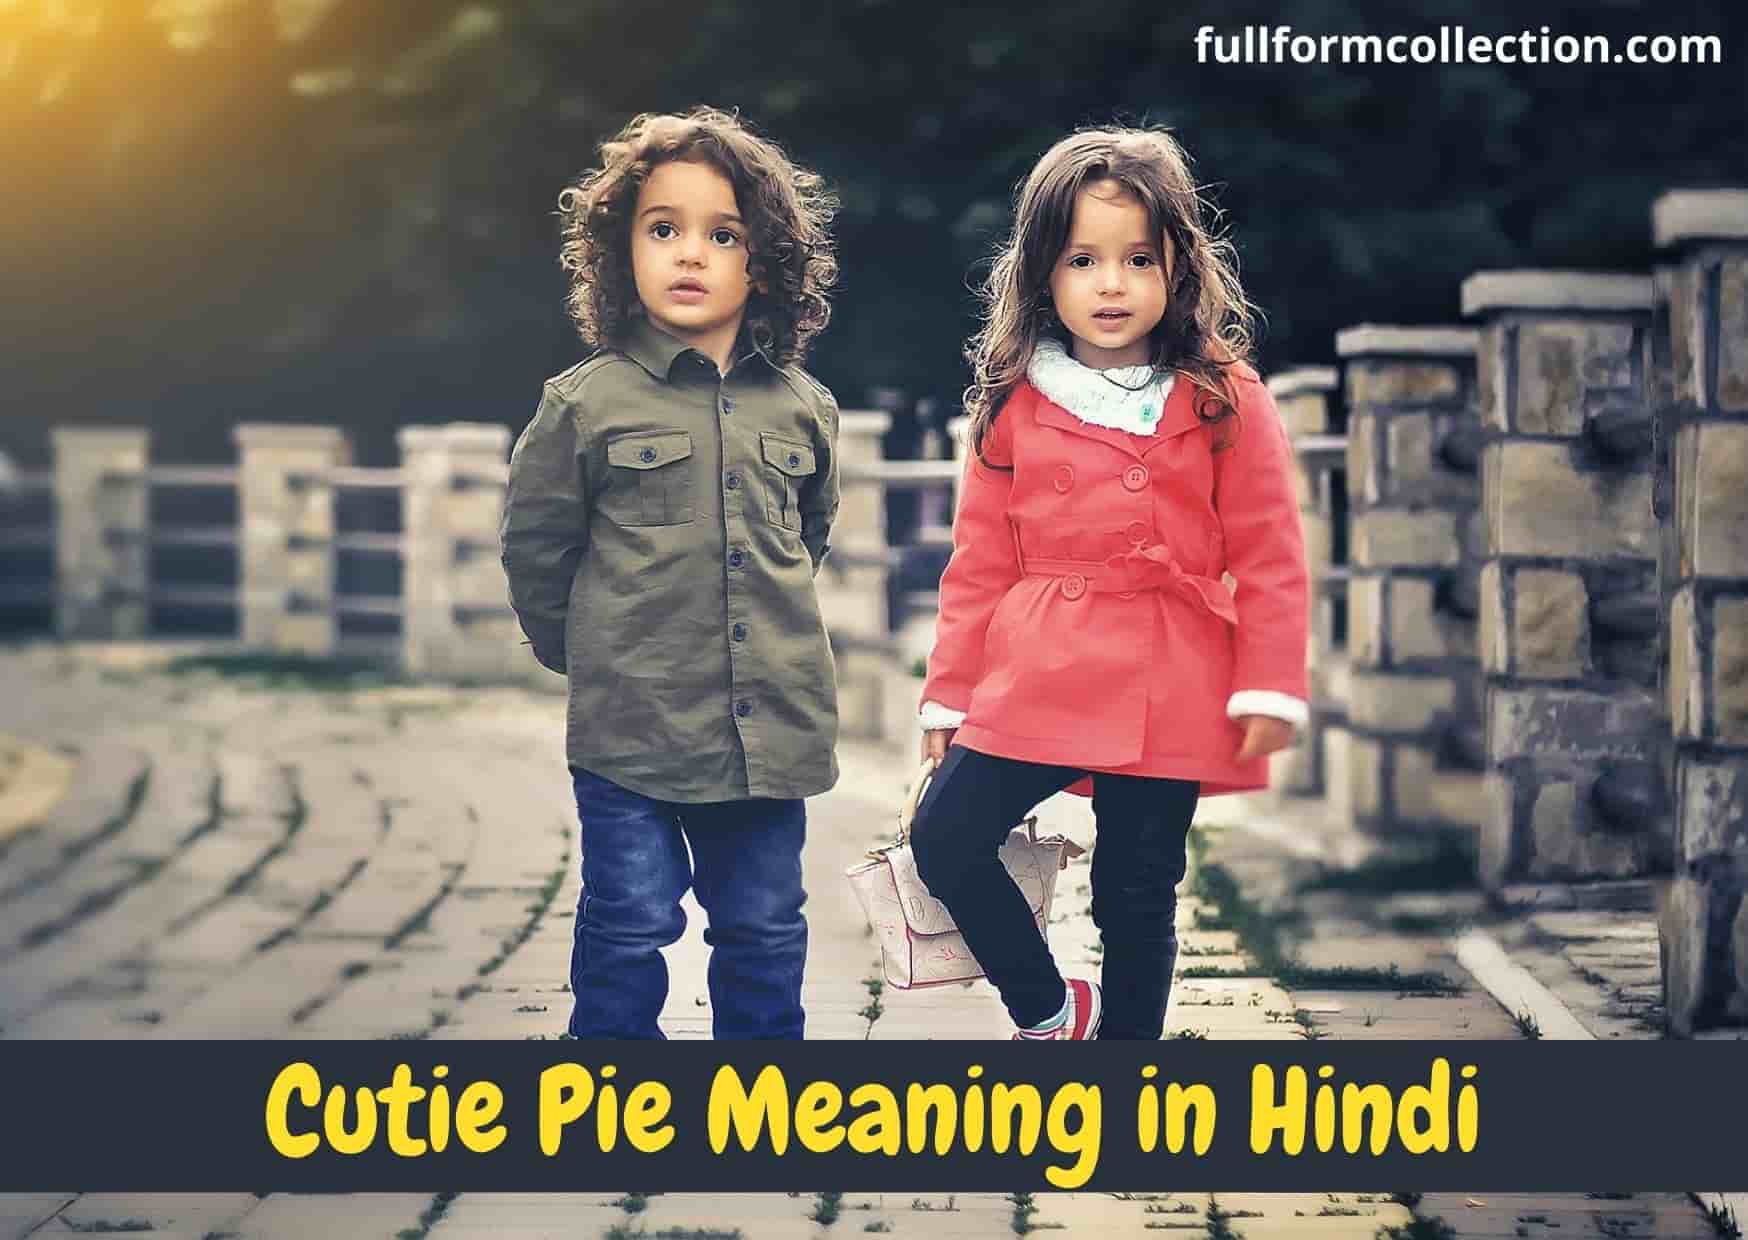 Cutie Pie Meaning in Hindi